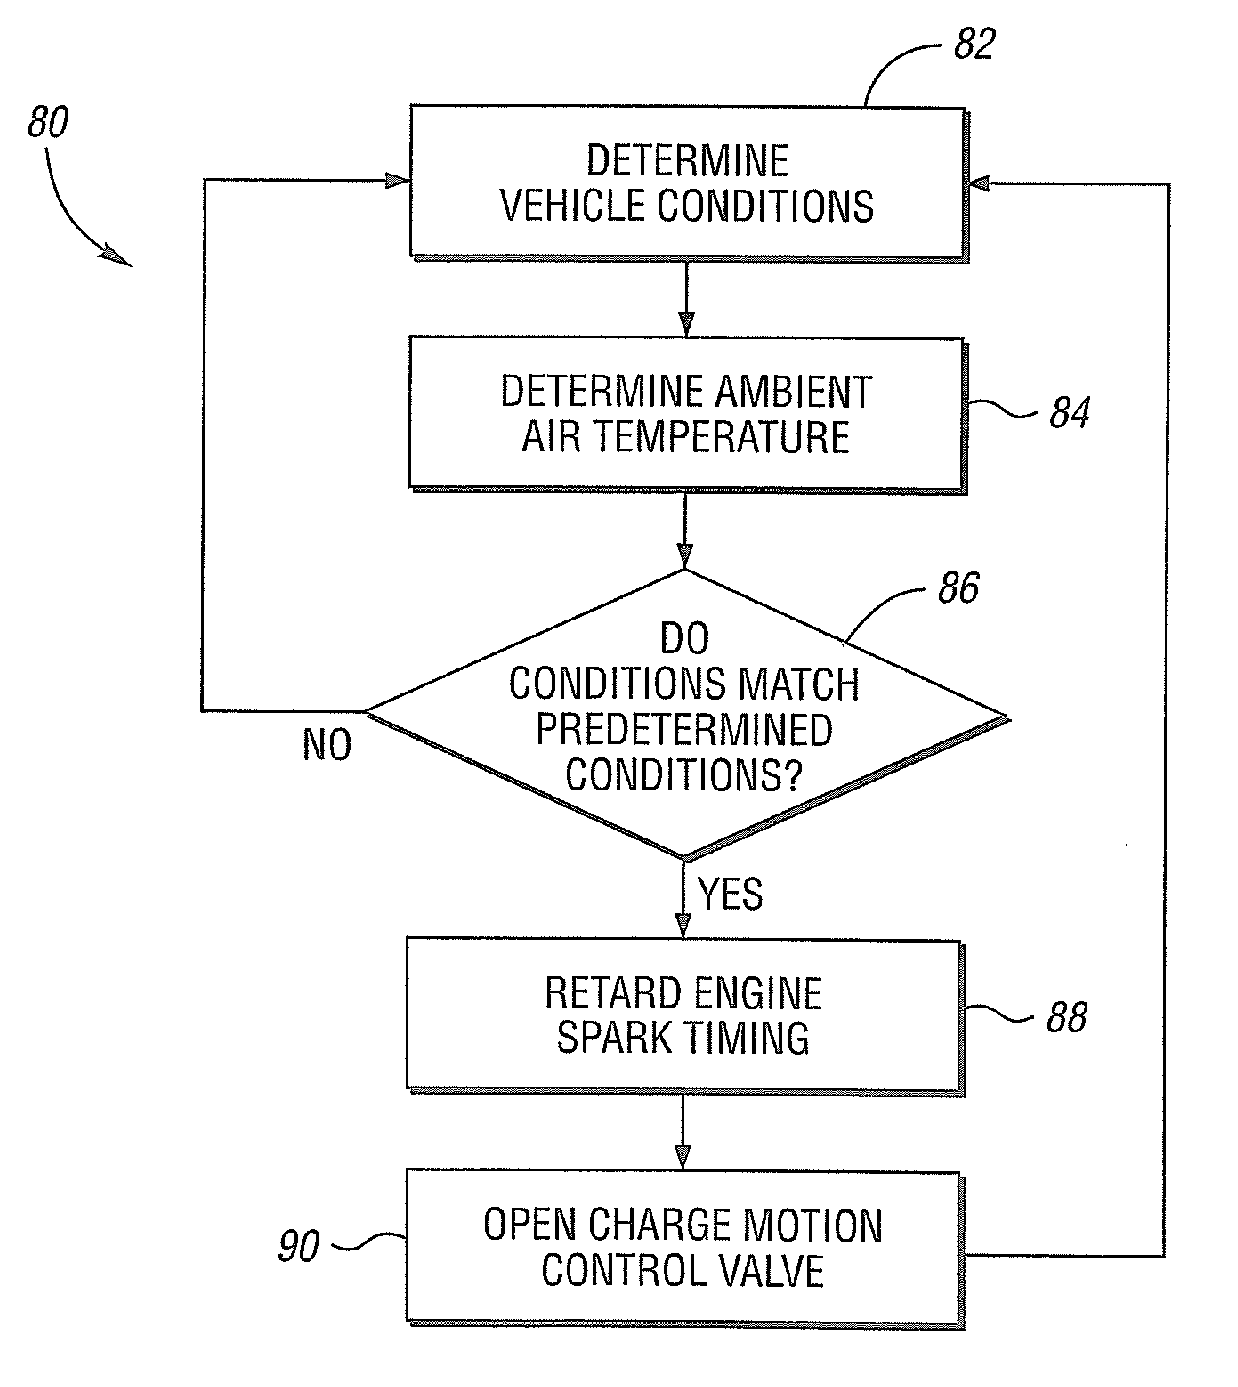 System and method for controlling an engine in a vehicle